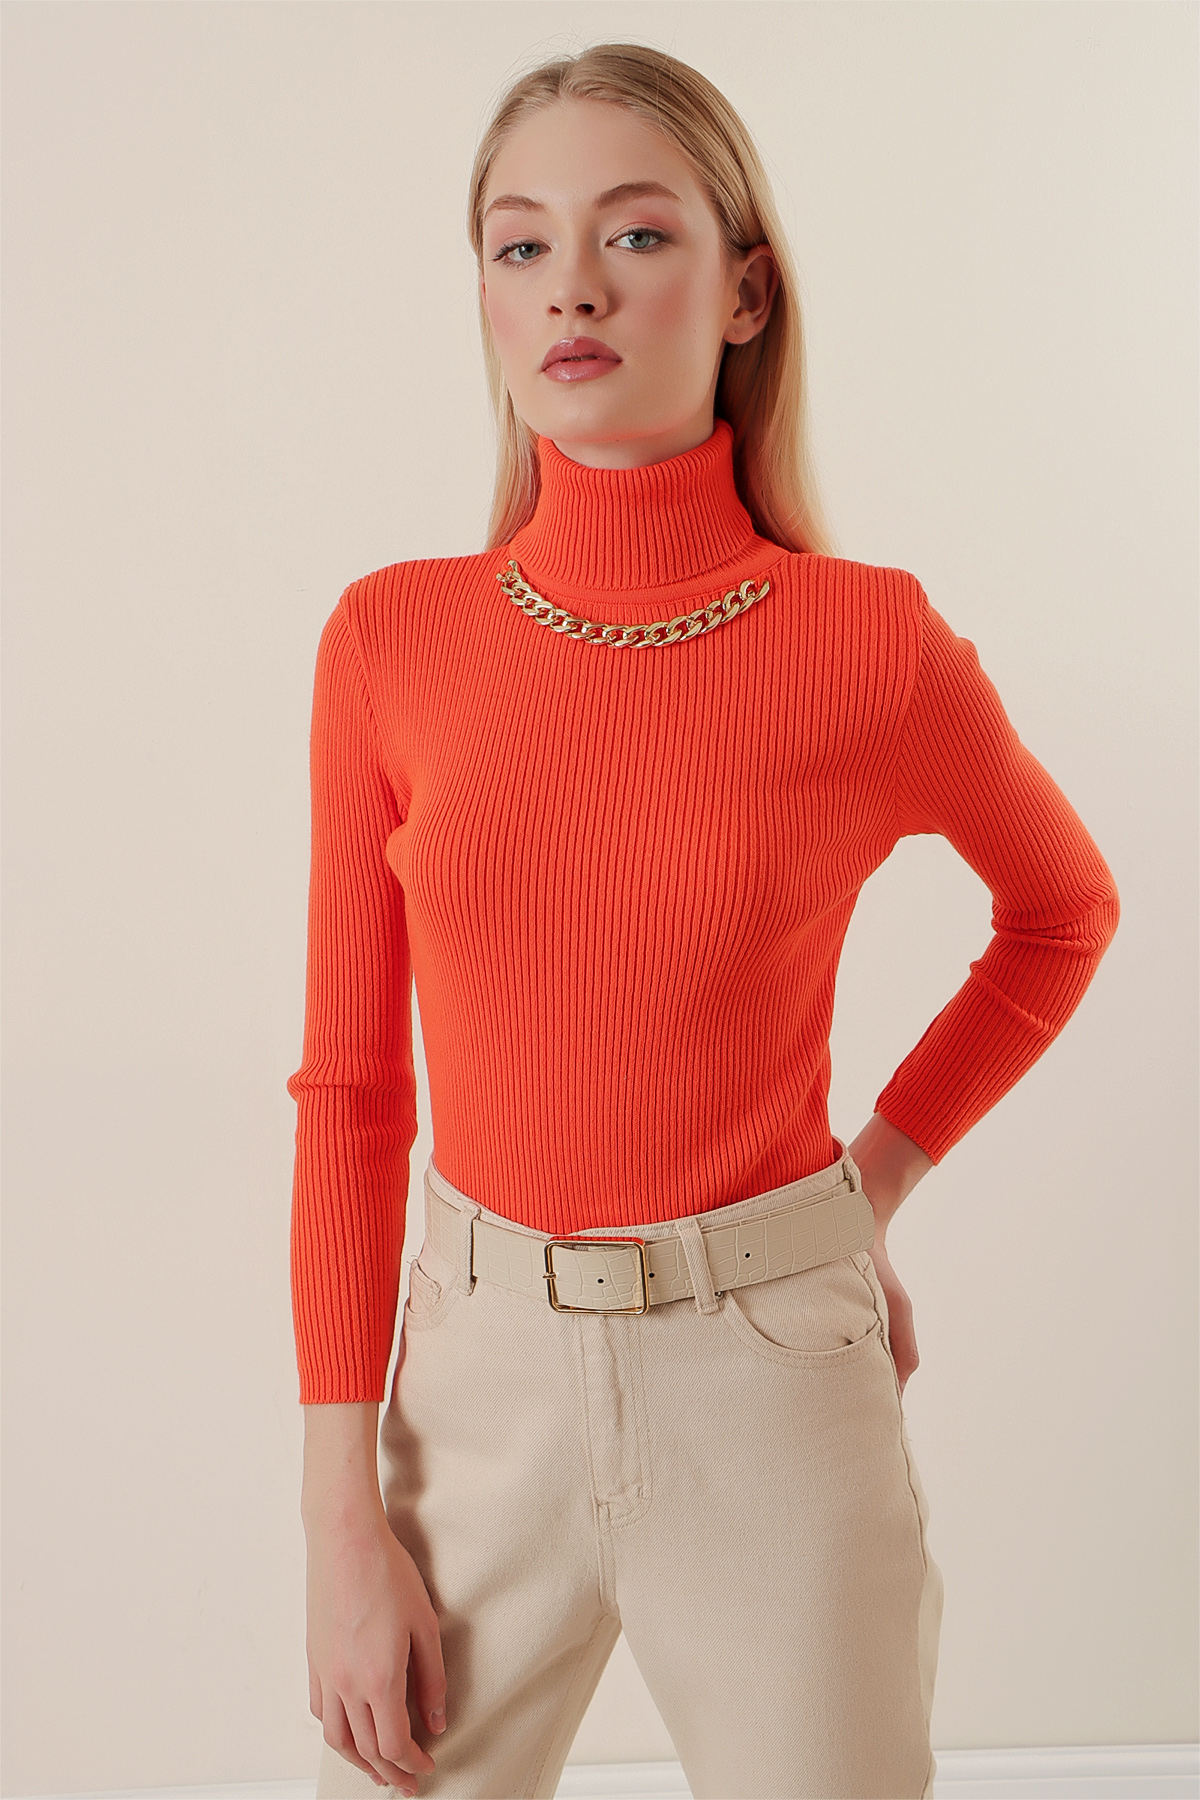 A model wears 45961 - Sweater - Orange, wholesale Sweater of Bigdart to display at Lonca